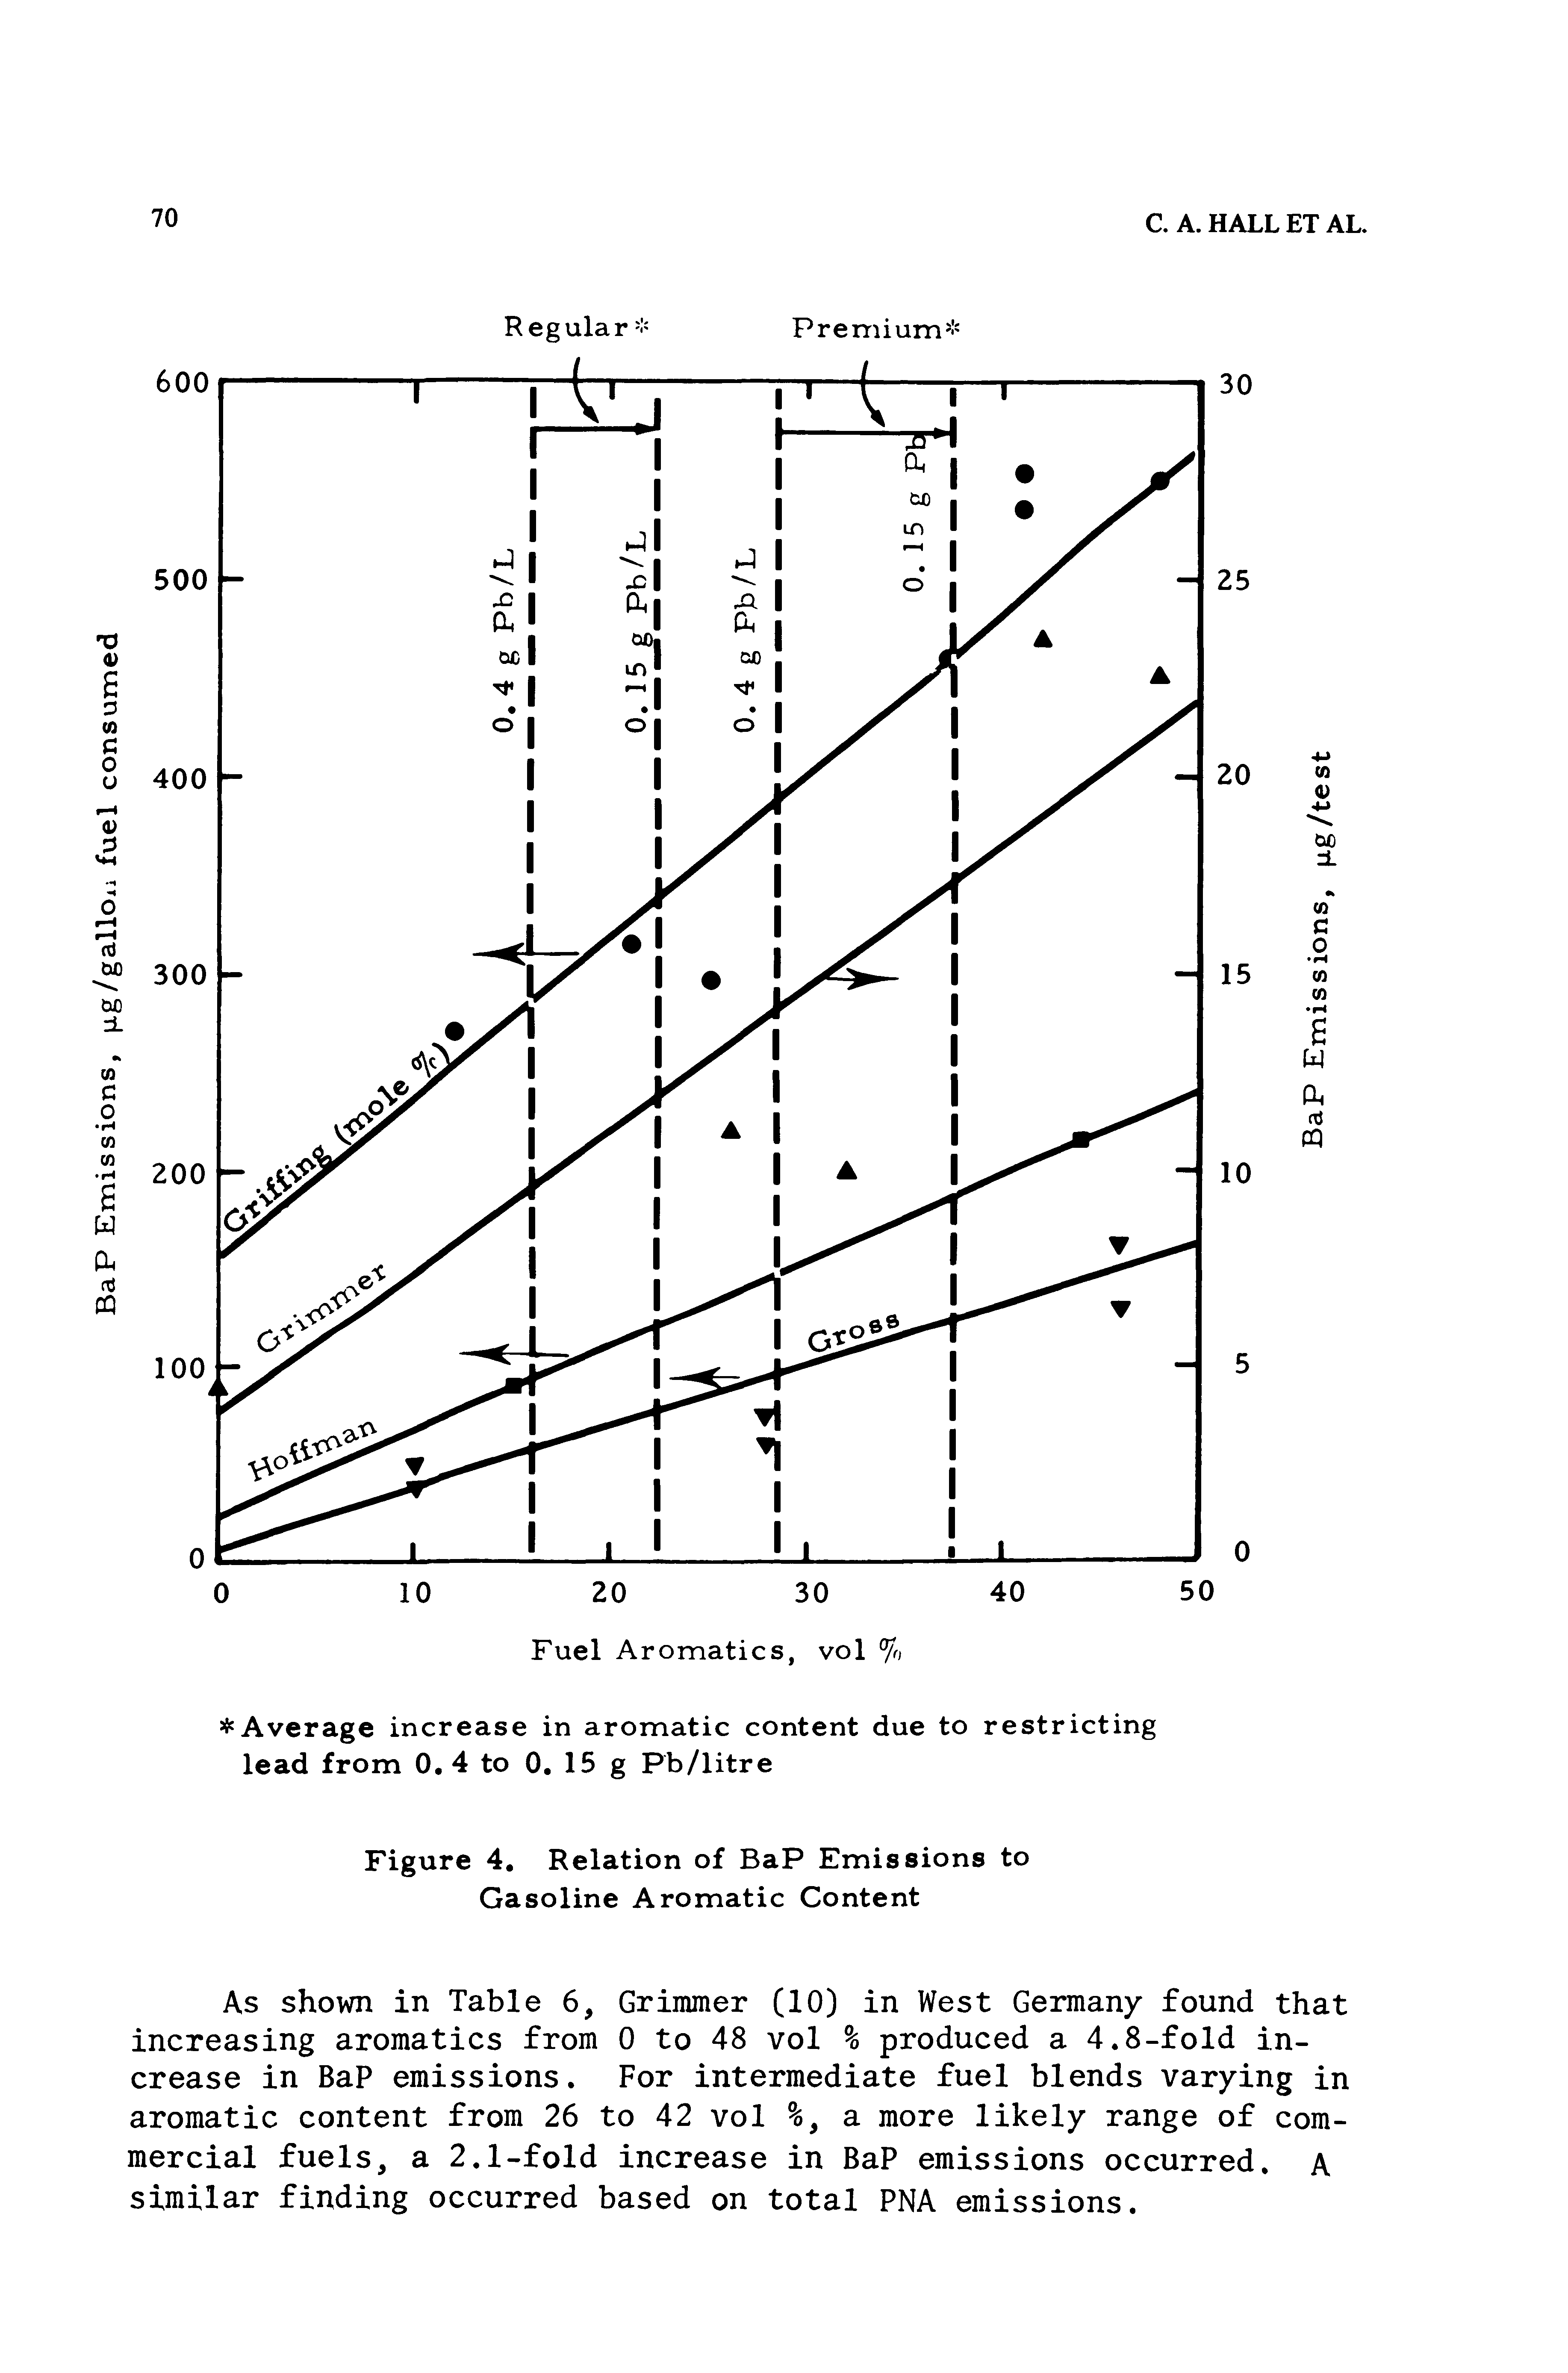 Figure 4, Relation of BaP Emissions to Gasoline Aromatic Content...